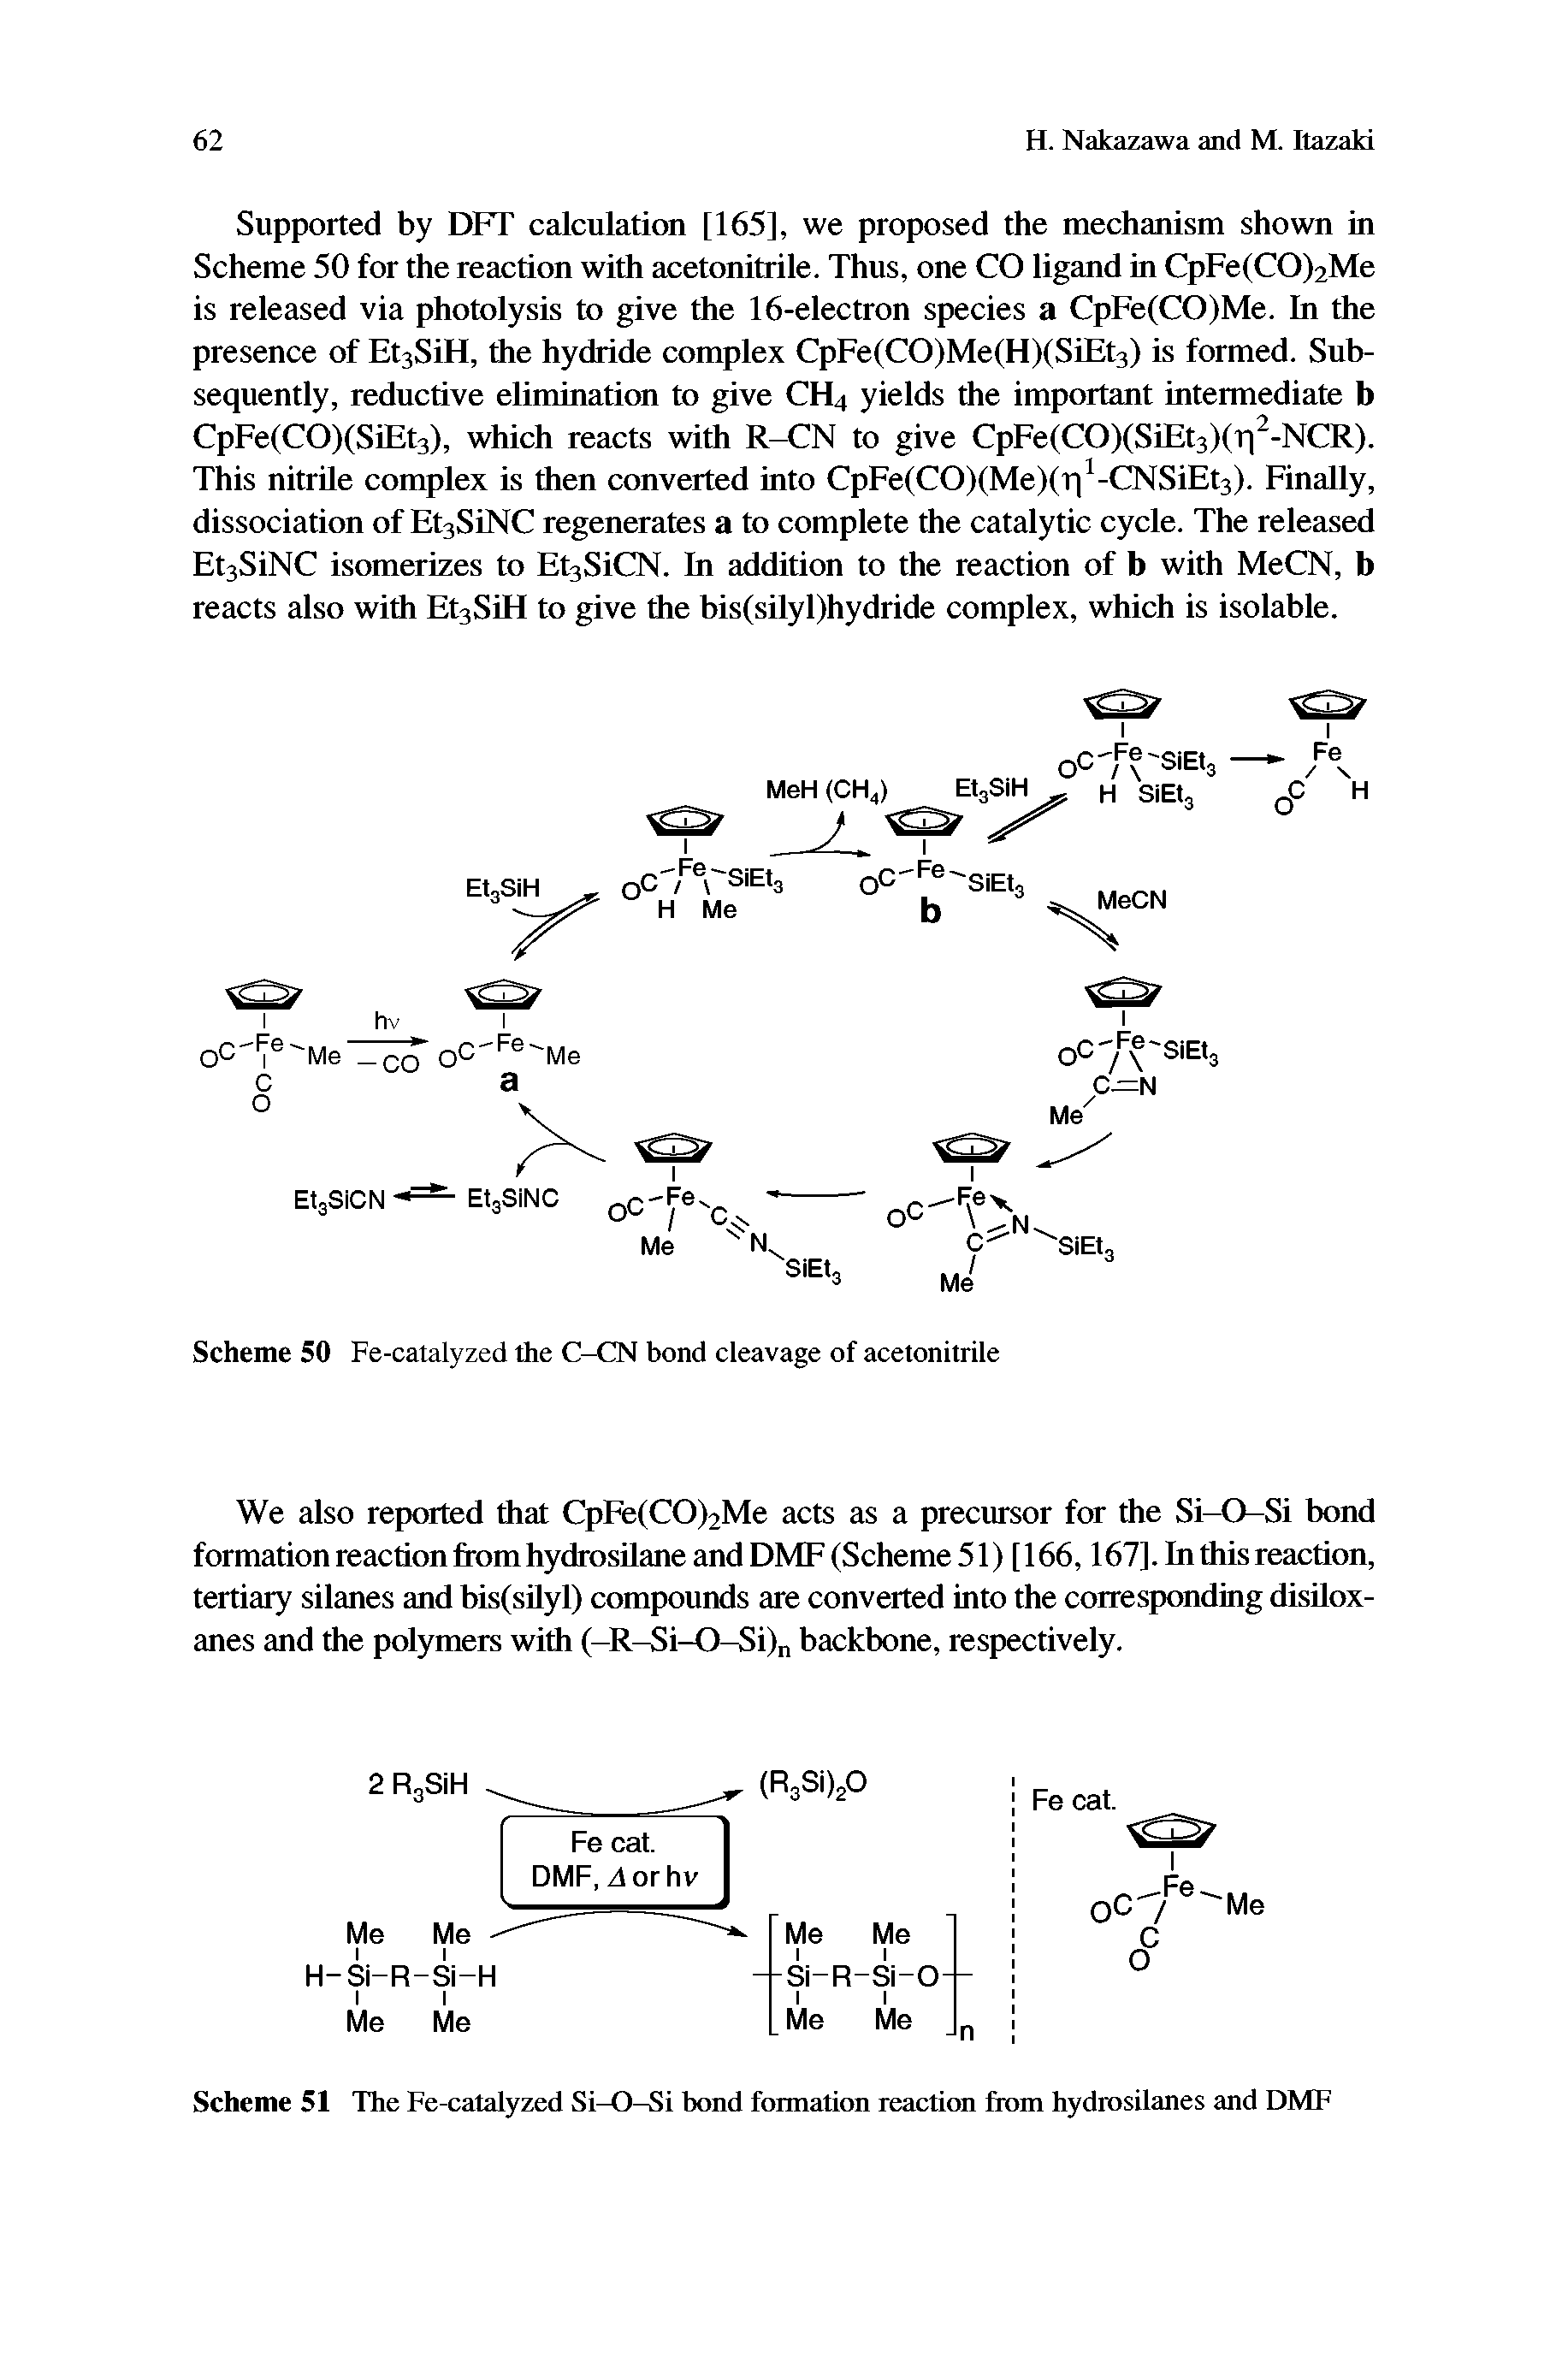 Scheme 51 The Fe-catalyzed Si-O-Si bond formation reaction from hydrosilanes and DMF...